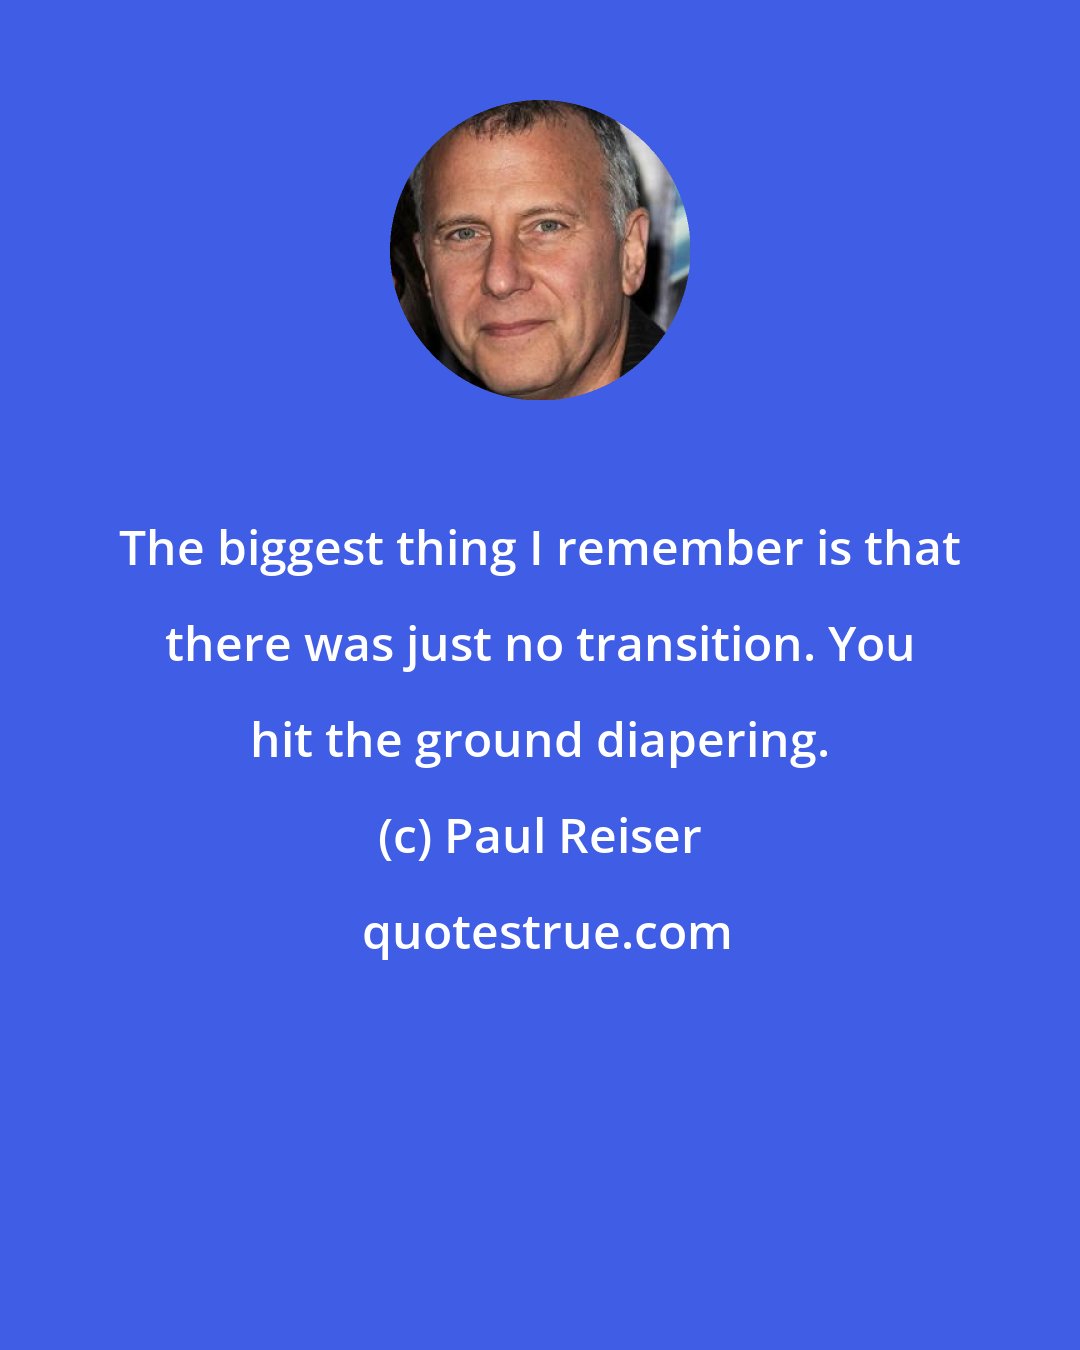 Paul Reiser: The biggest thing I remember is that there was just no transition. You hit the ground diapering.